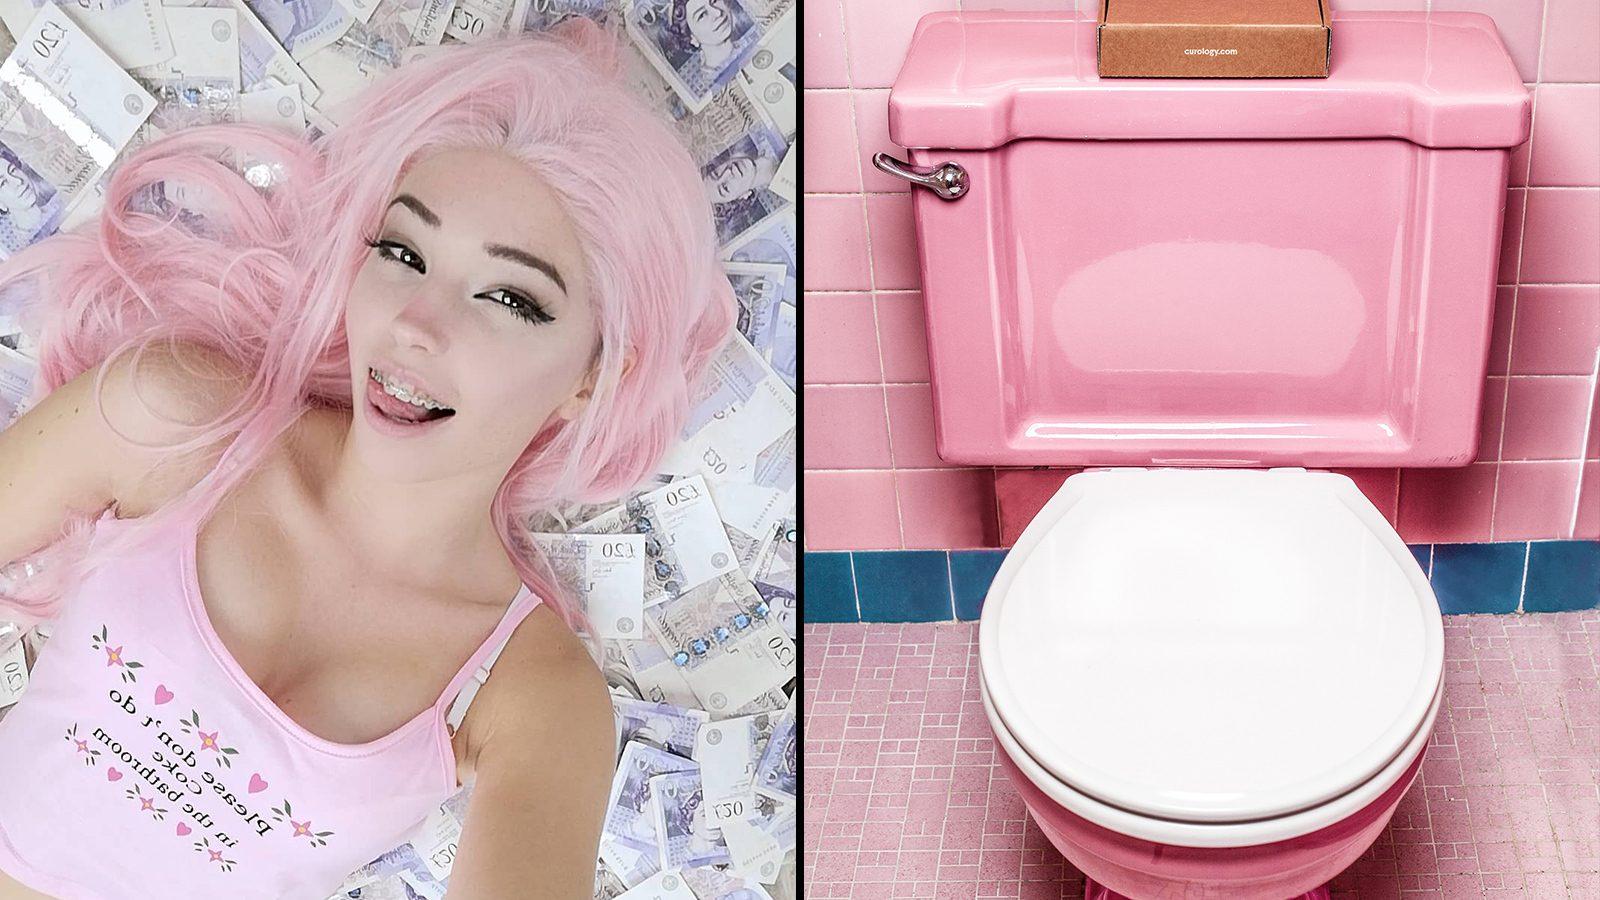 Belle Delphine: Gamer girl who sold bathwater is back with